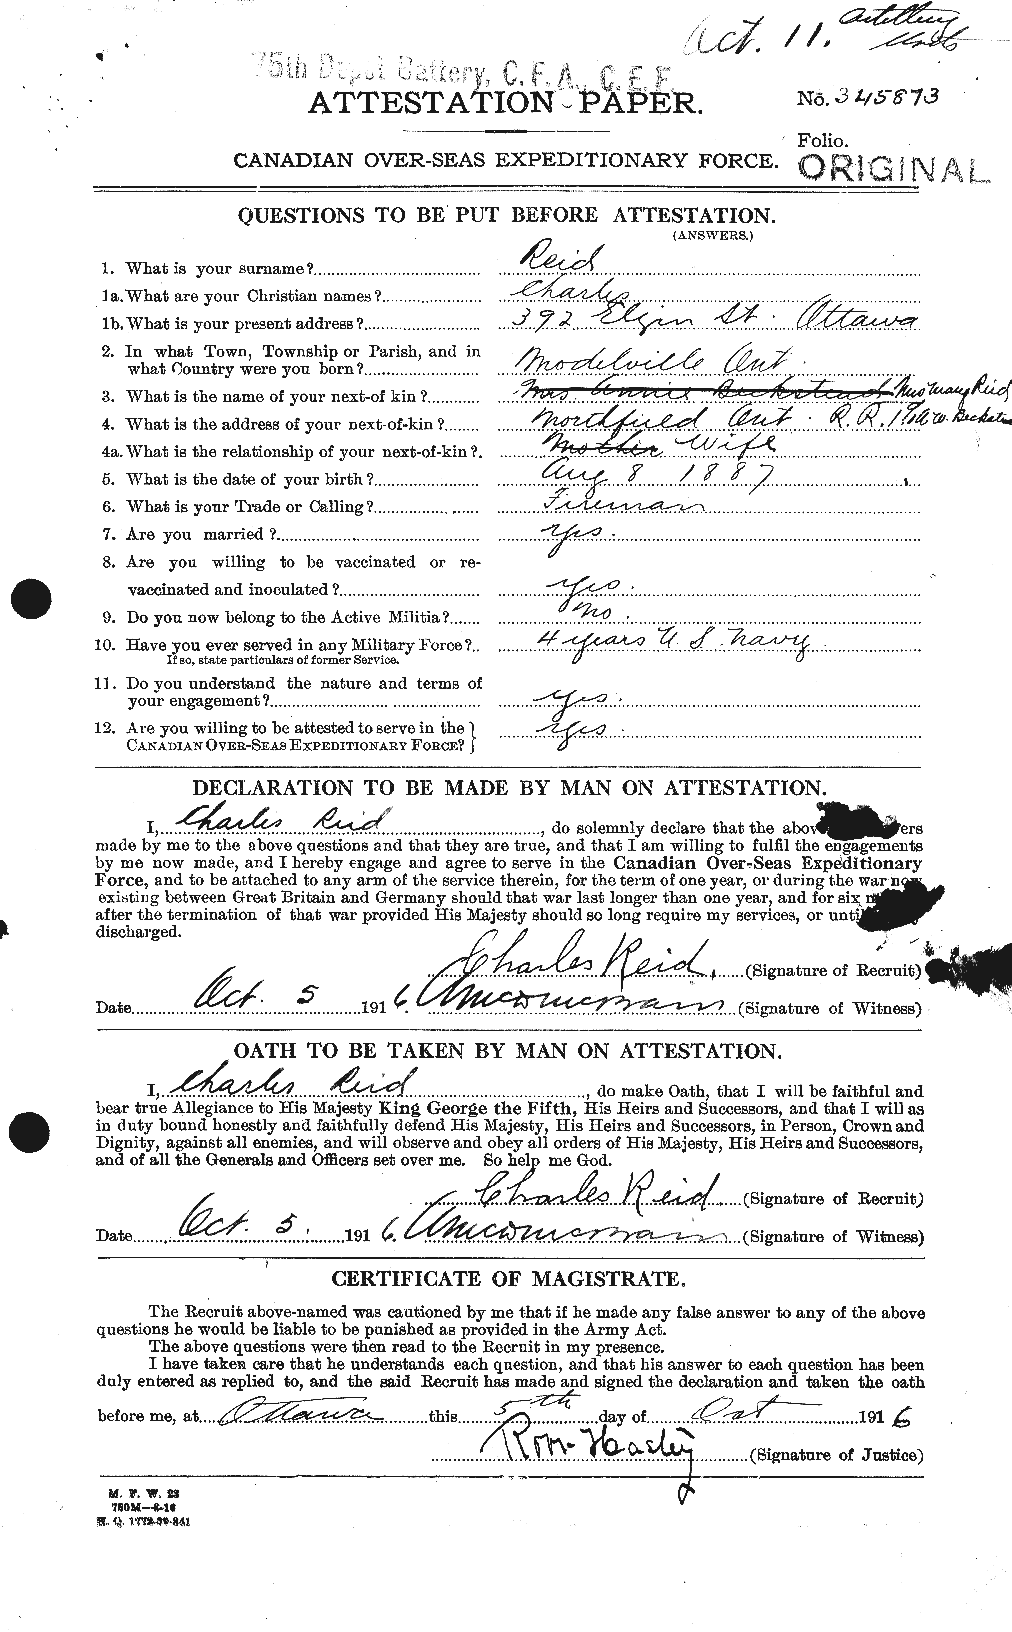 Personnel Records of the First World War - CEF 597873a